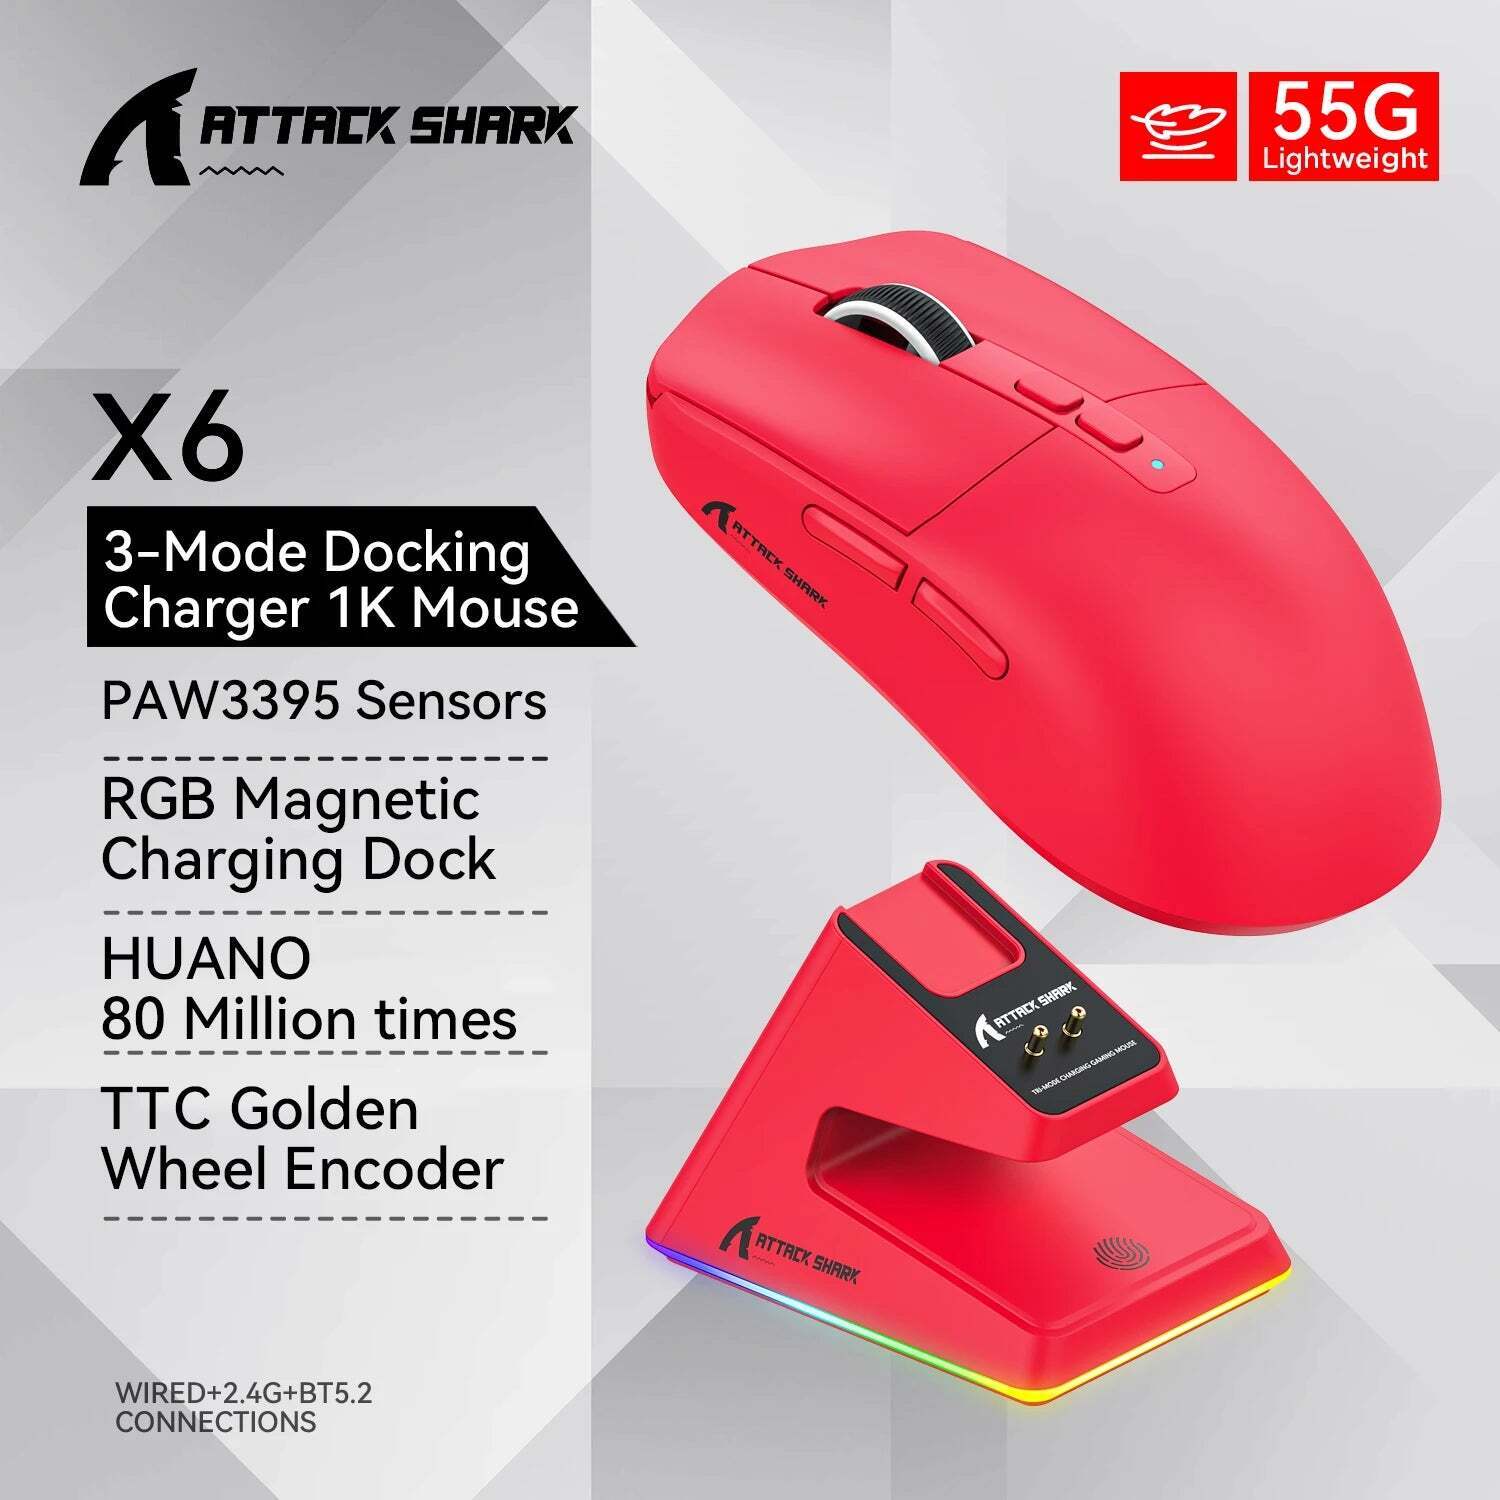 Attack Shark X6 Bluetooth Macro Gaming Mouse